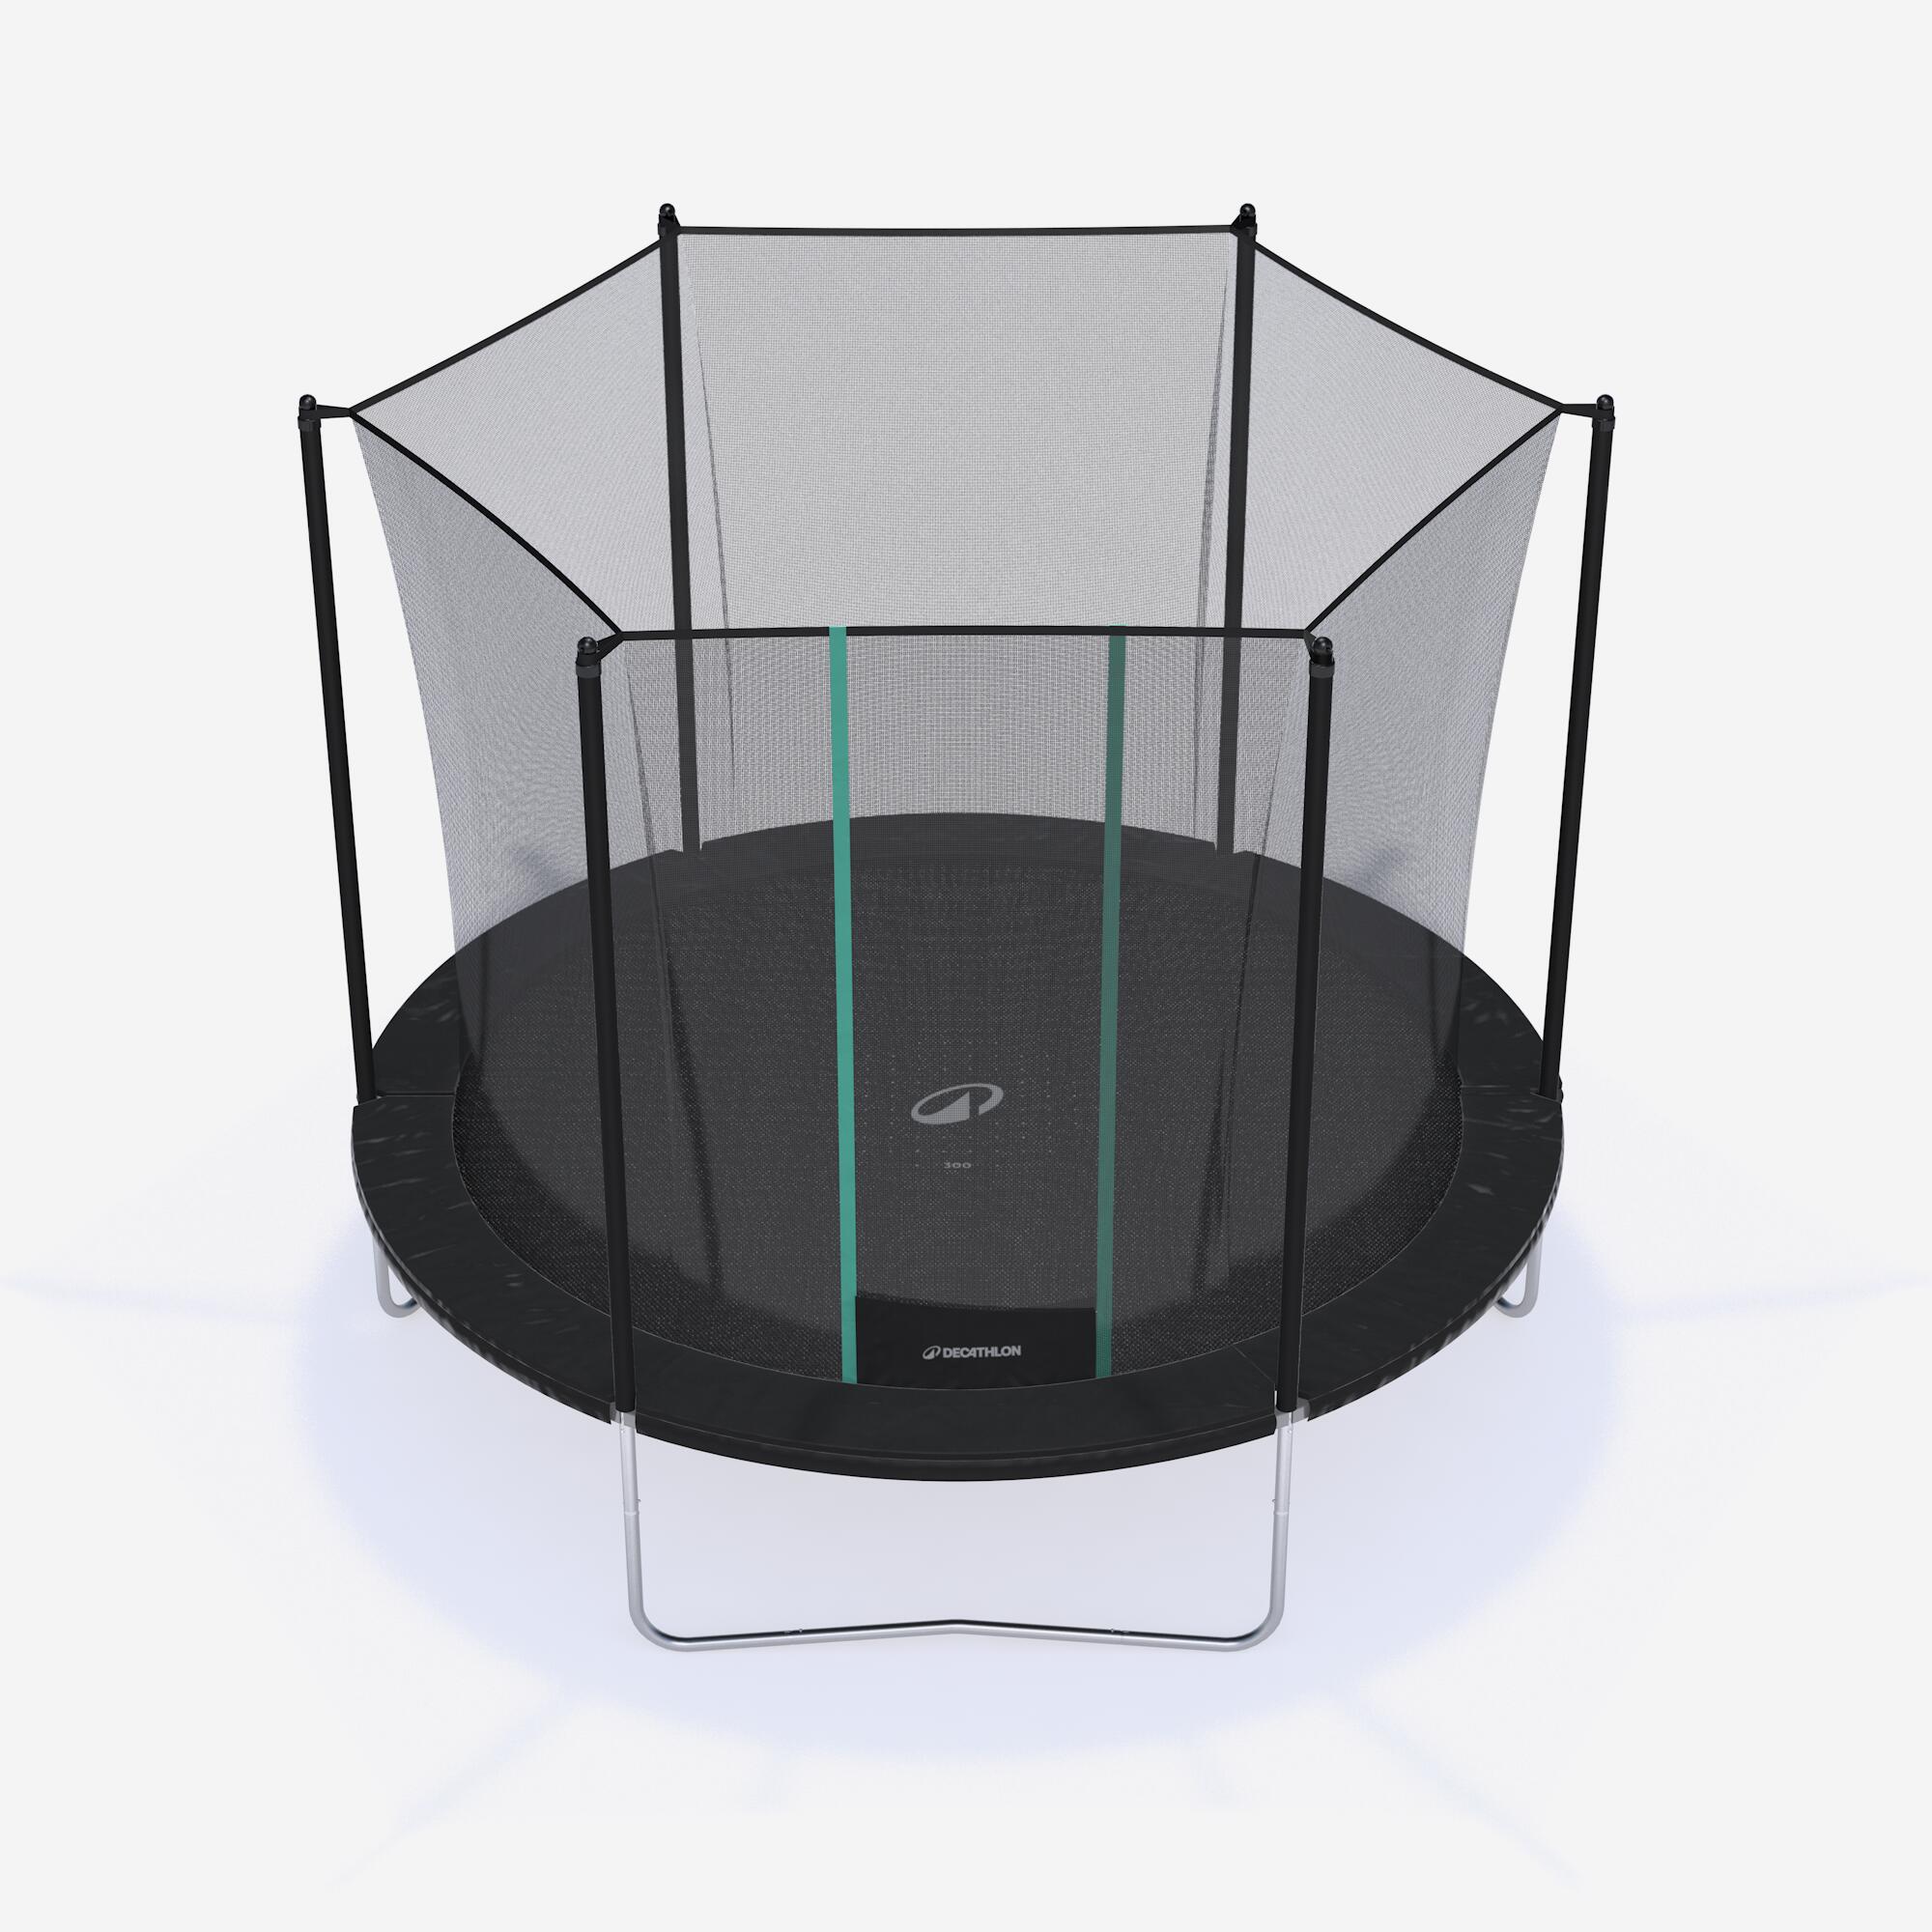 DOMYOS Trampoline 300 with Netting - Tool-Free Design